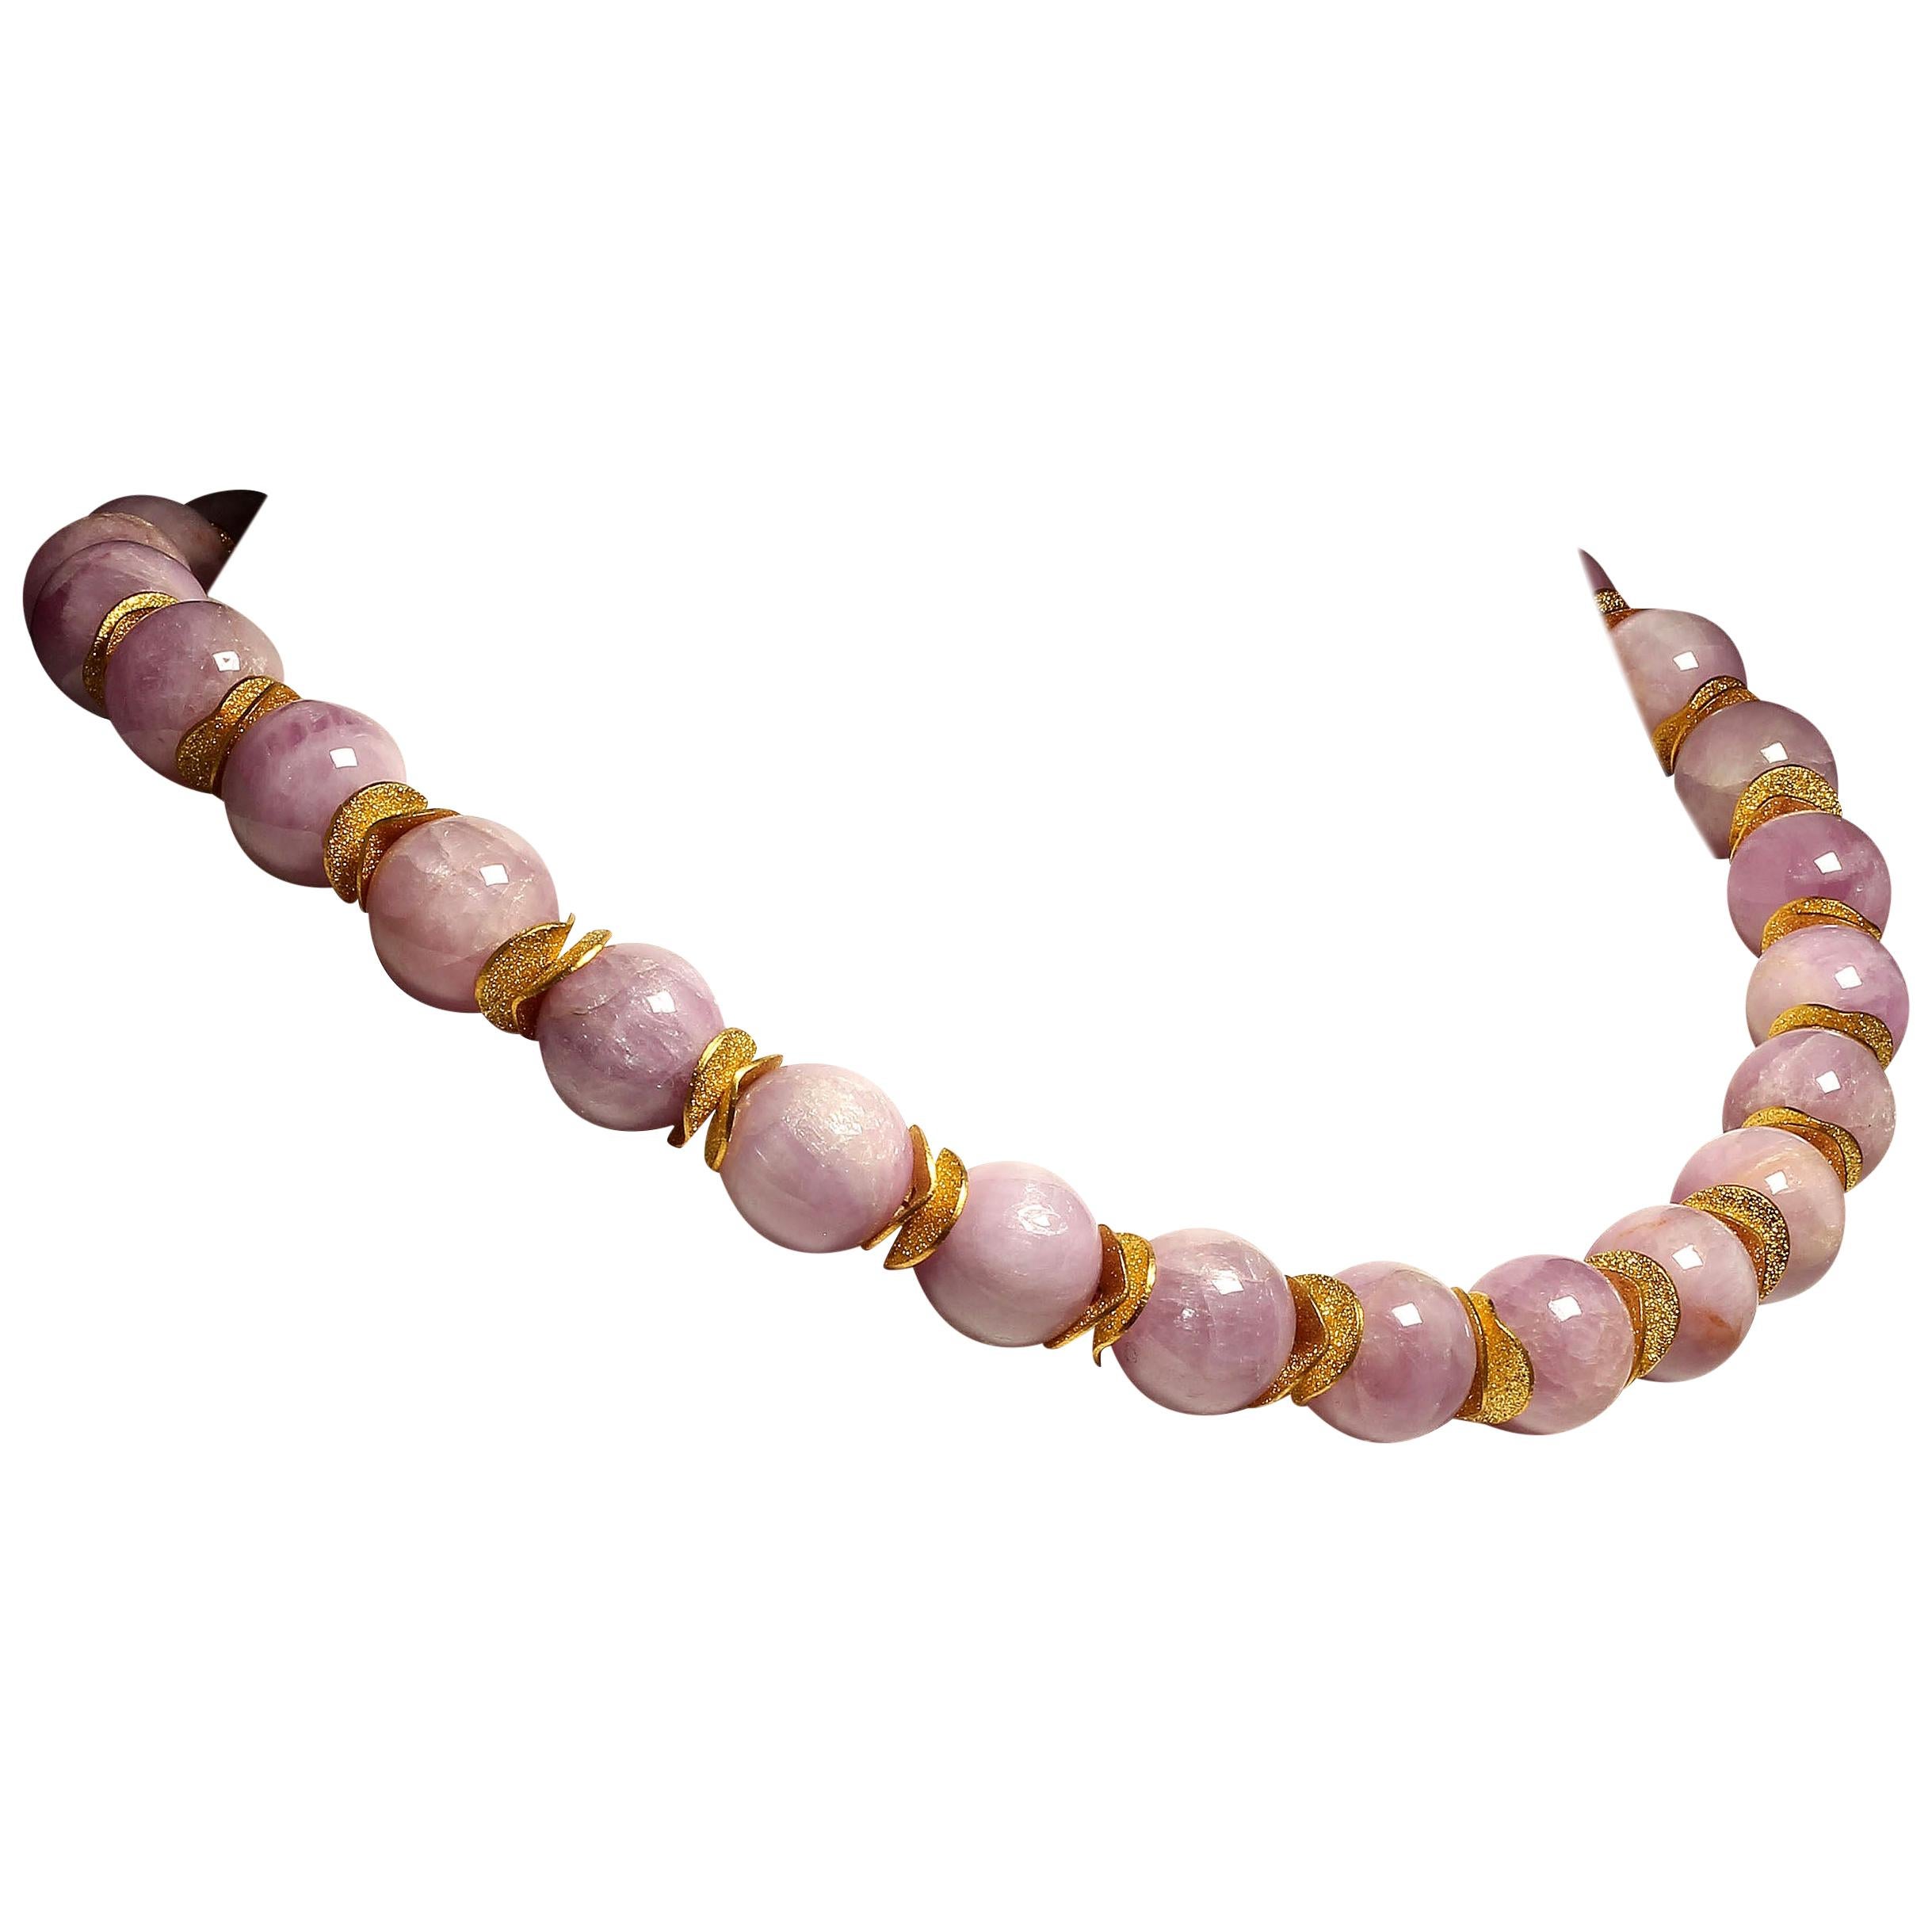 AJD Pink Kunzite with Goldy Accents Necklace